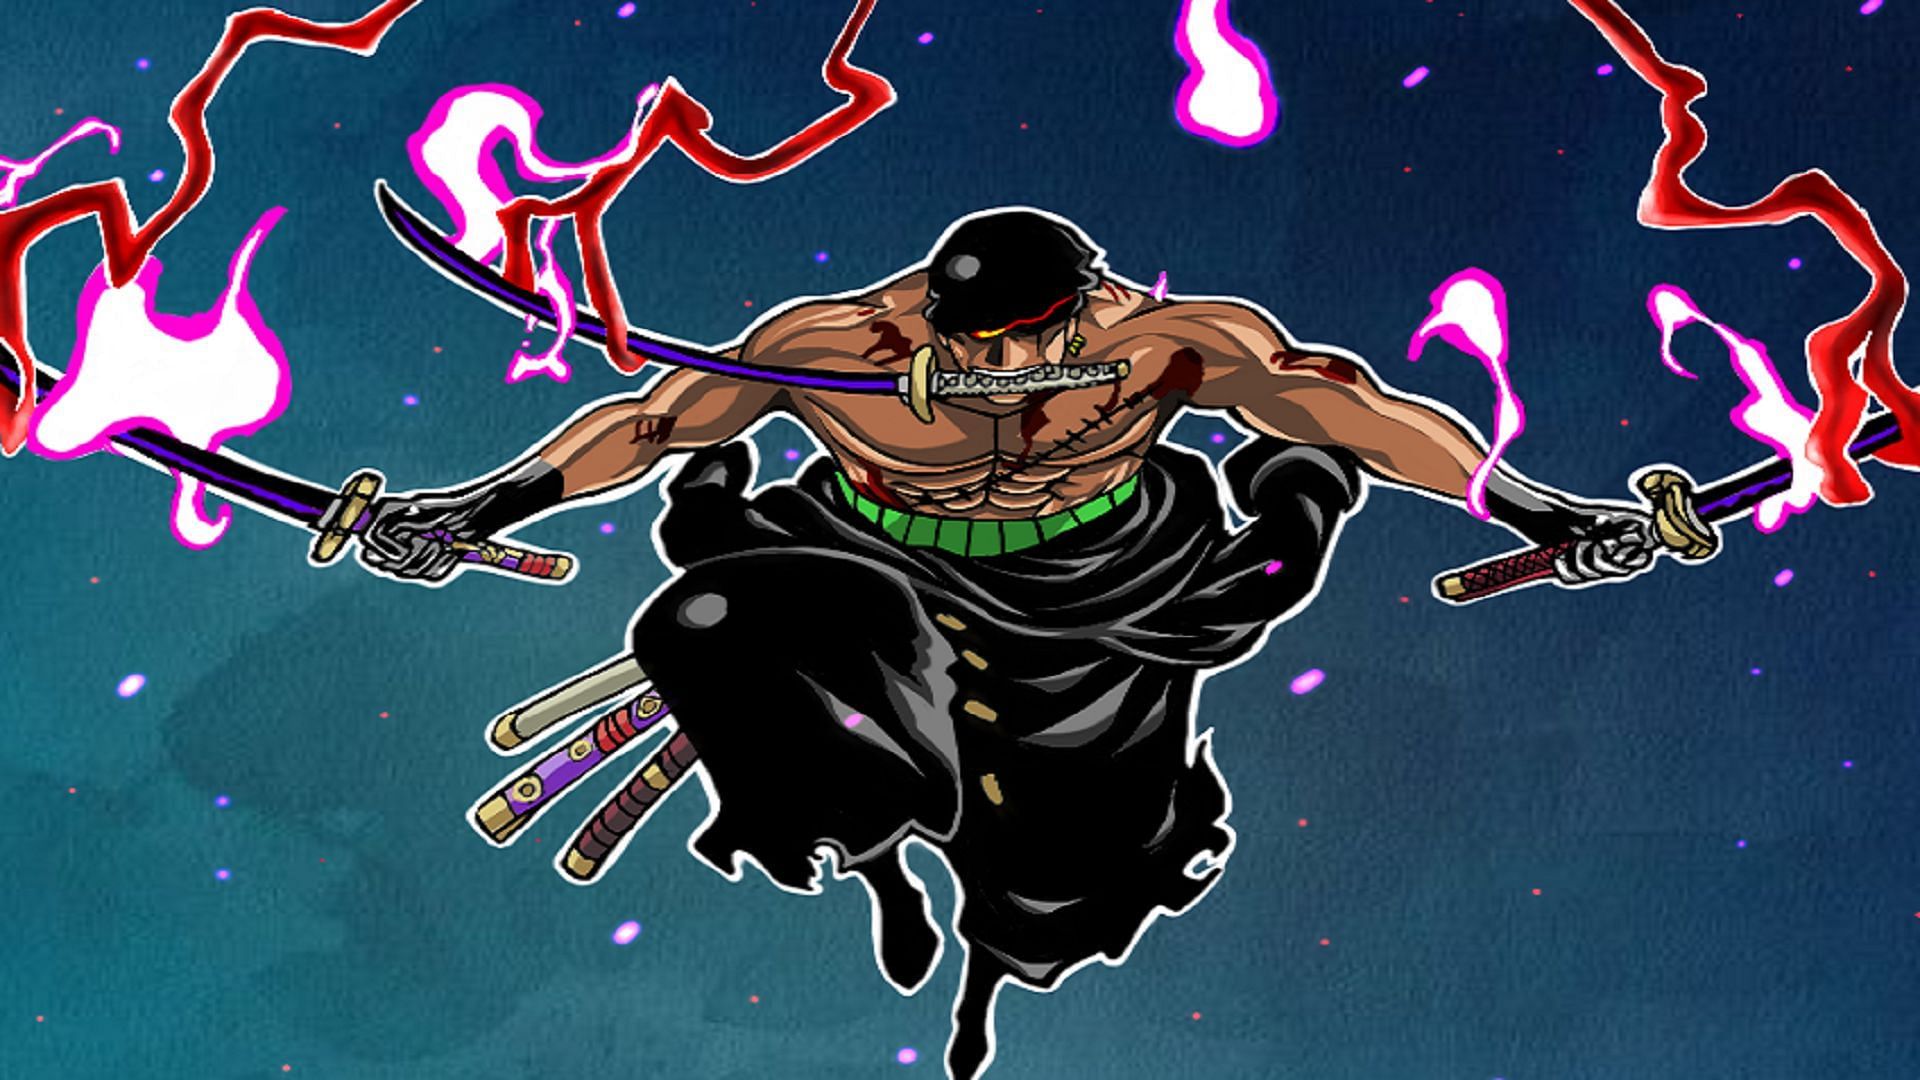 After unlocking the Advanced Conqueror&#039;s Haki, Zoro became powerful enough to enter the circle of the very strongest (Image via Eiichiro Oda/Shueisha, One Piece)